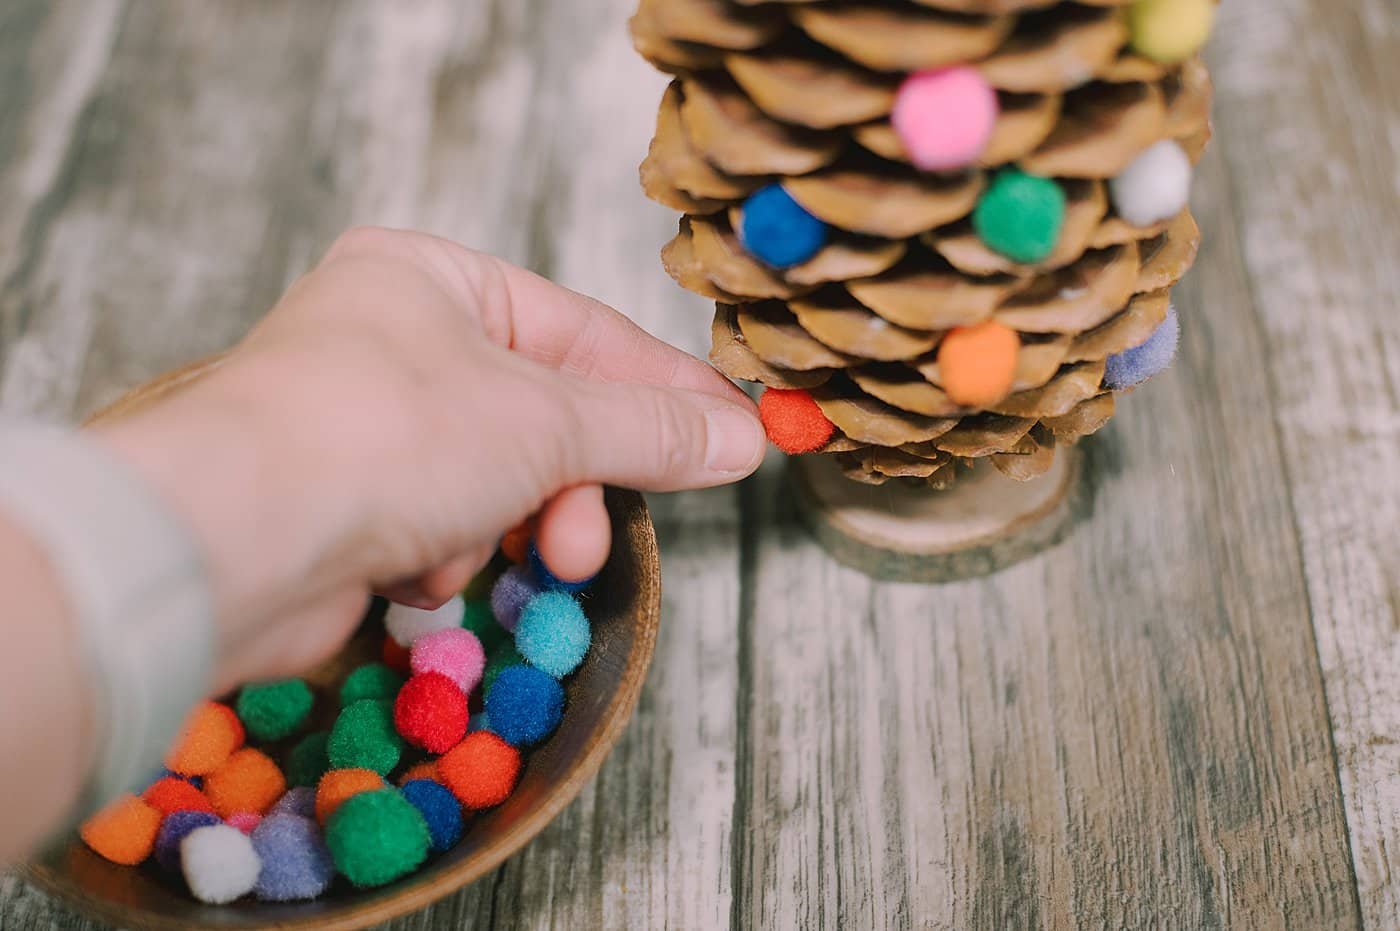 Hot glue pom poms onto the ends of the giant pinecone.